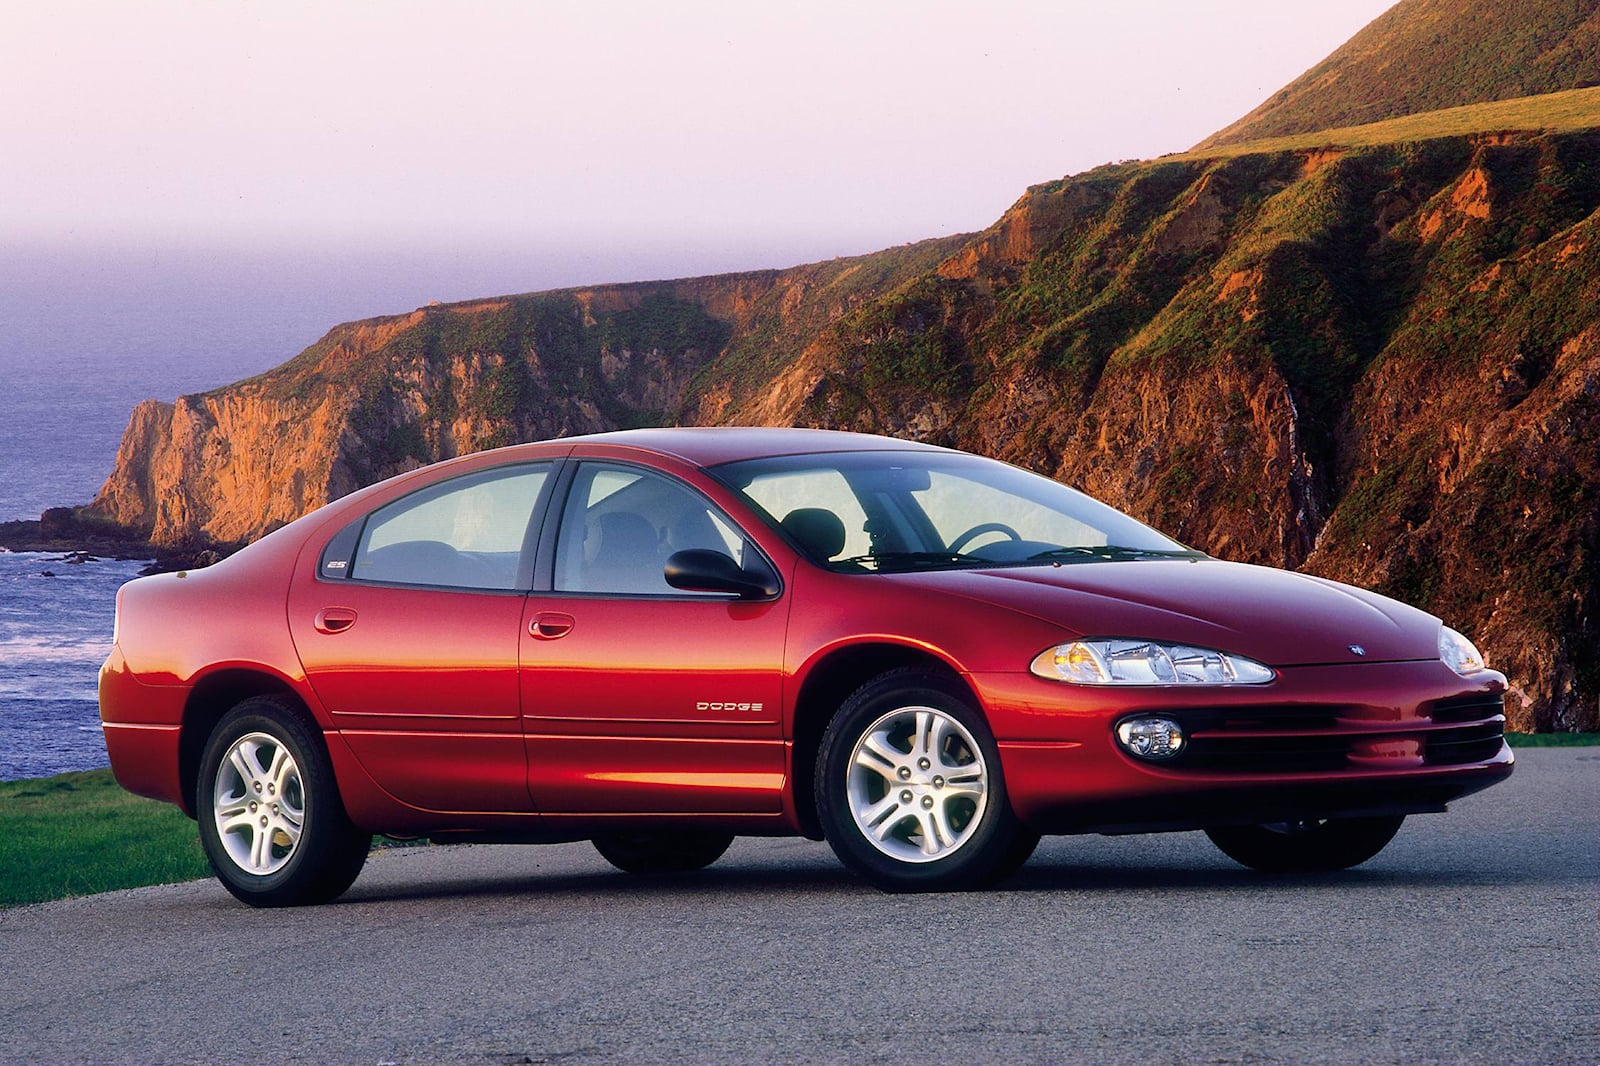 Used Dodge Intrepid | Check Intrepid for sale in USA: prices of every  dealership | CarBuzz